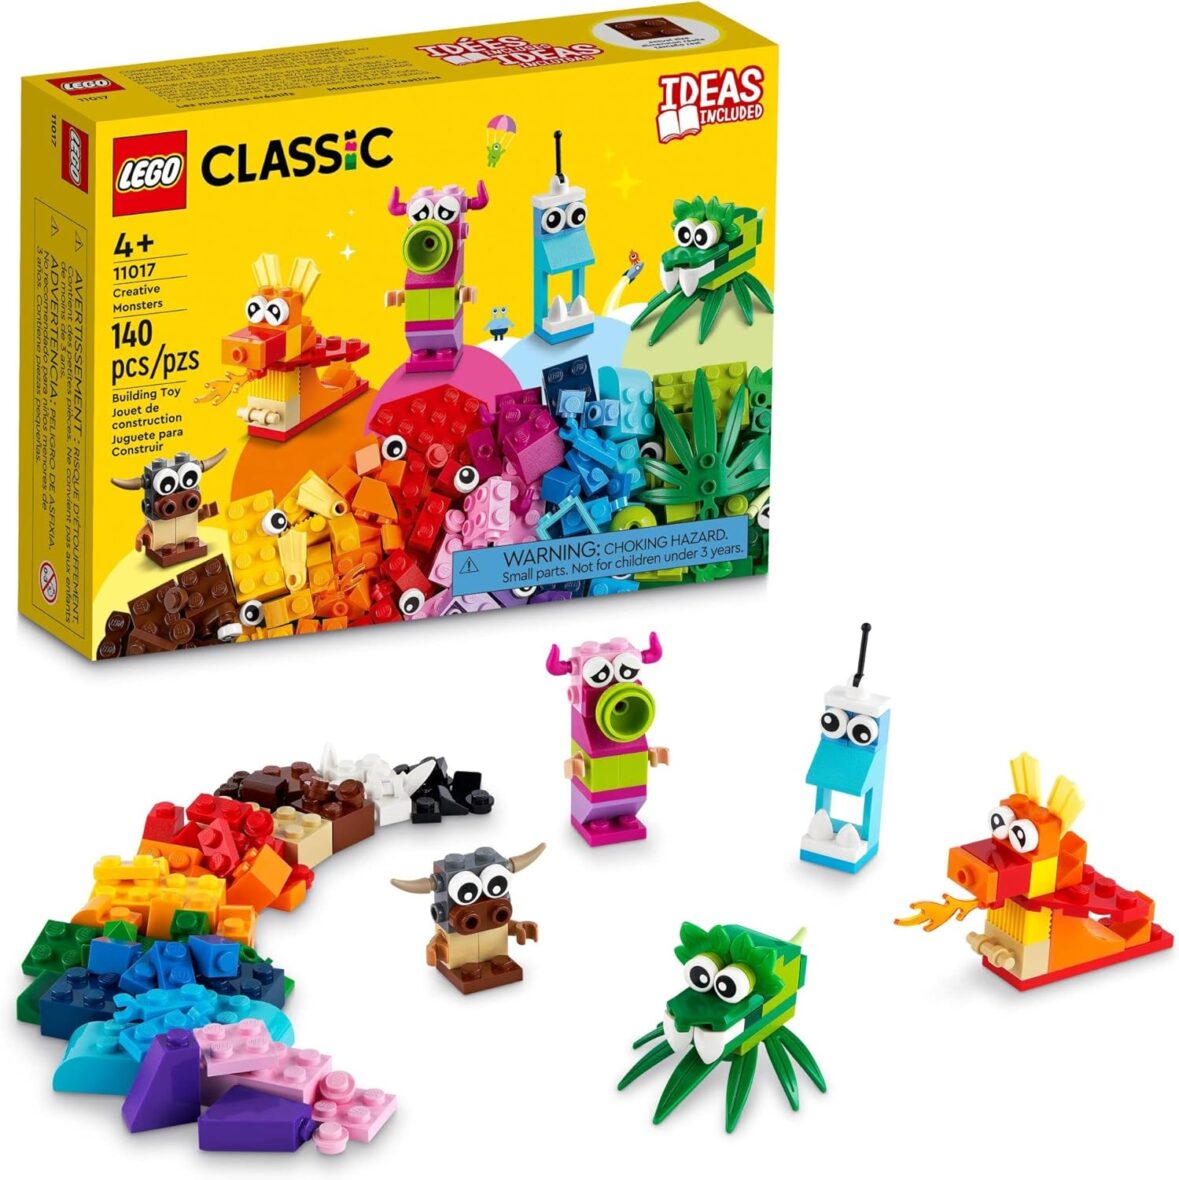 LEGO Classic Creative Monsters 11017 Building Toy Set, Includes 5 Monster Toy Mini Build Ideas to Inspire Creative Play for Kids Ages 4 and Up